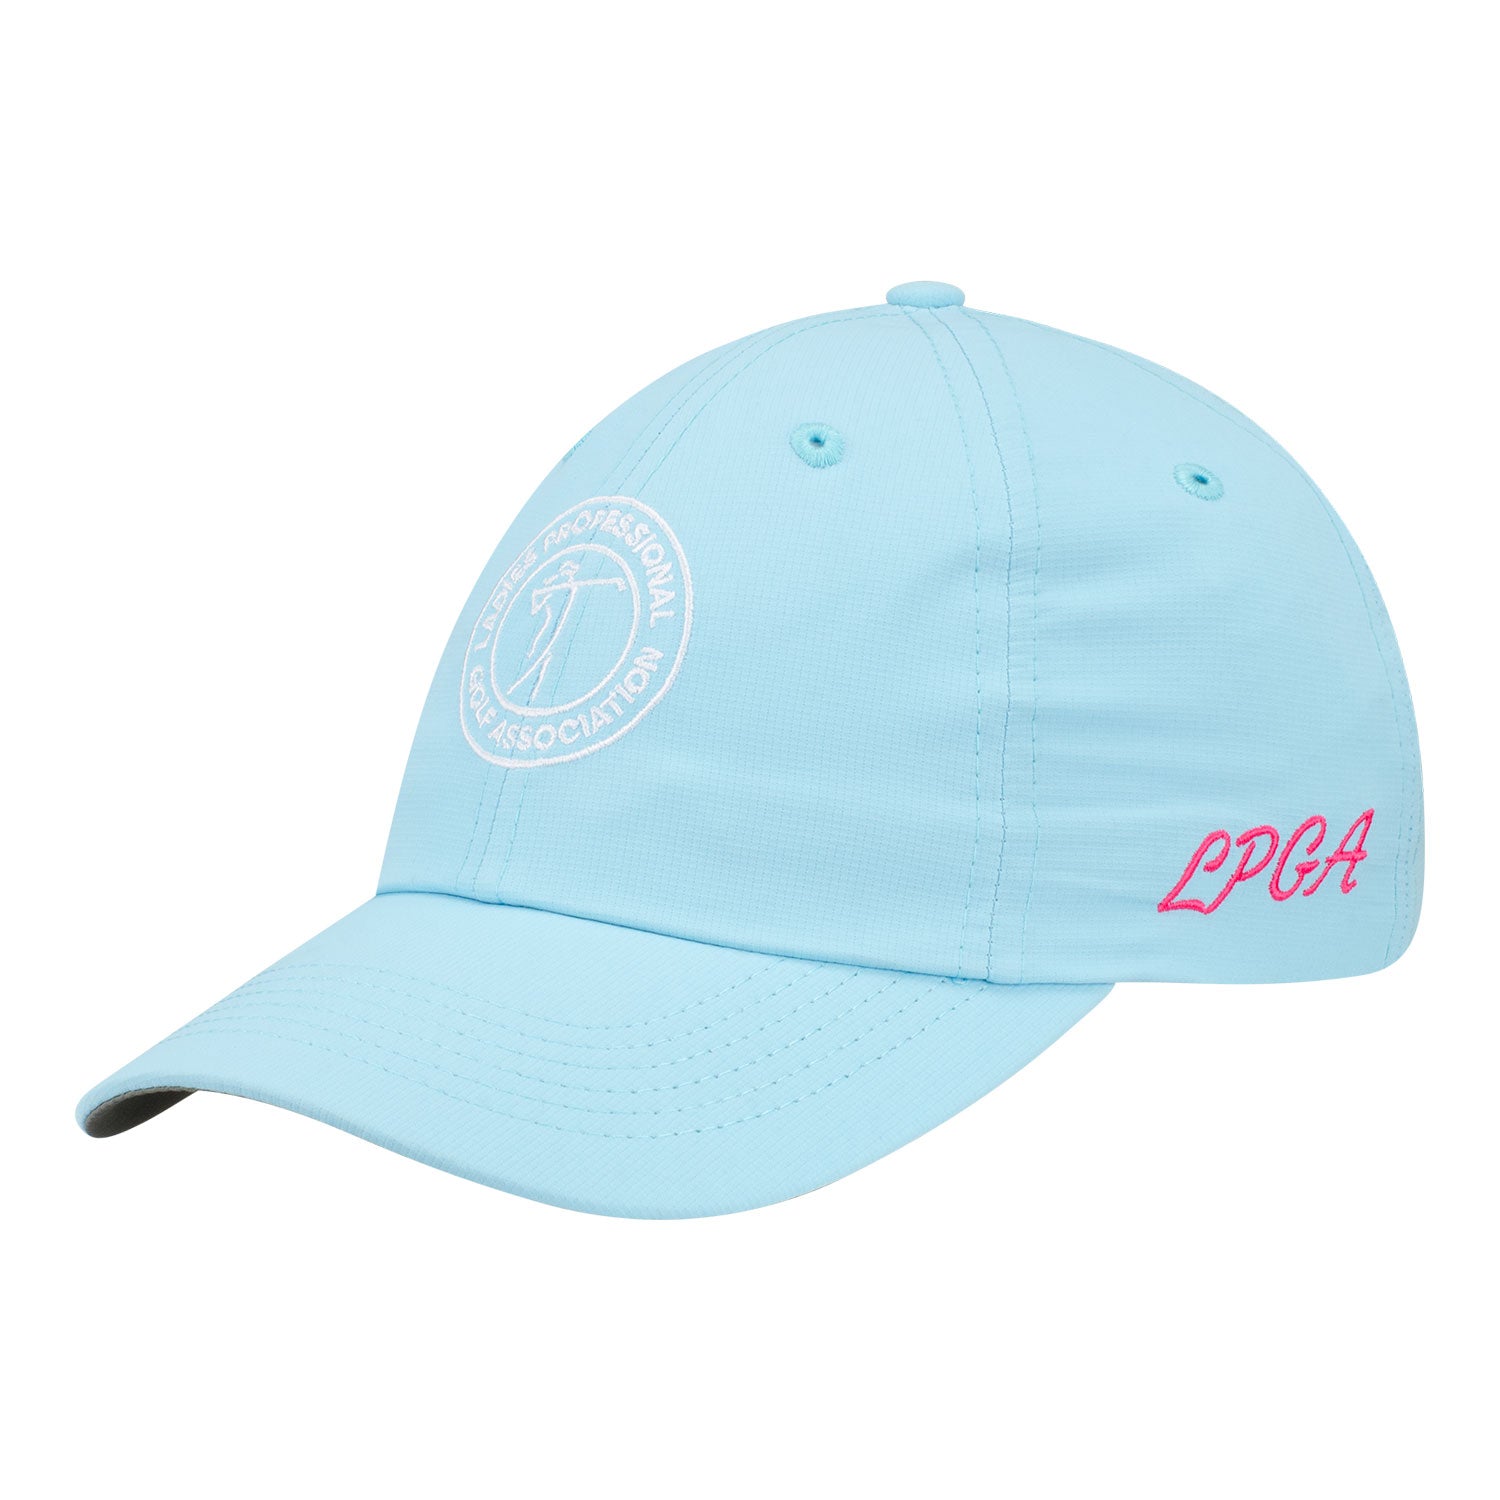 Imperial 2023 LPGA Women's Hat in Blue - Angled Left Side View